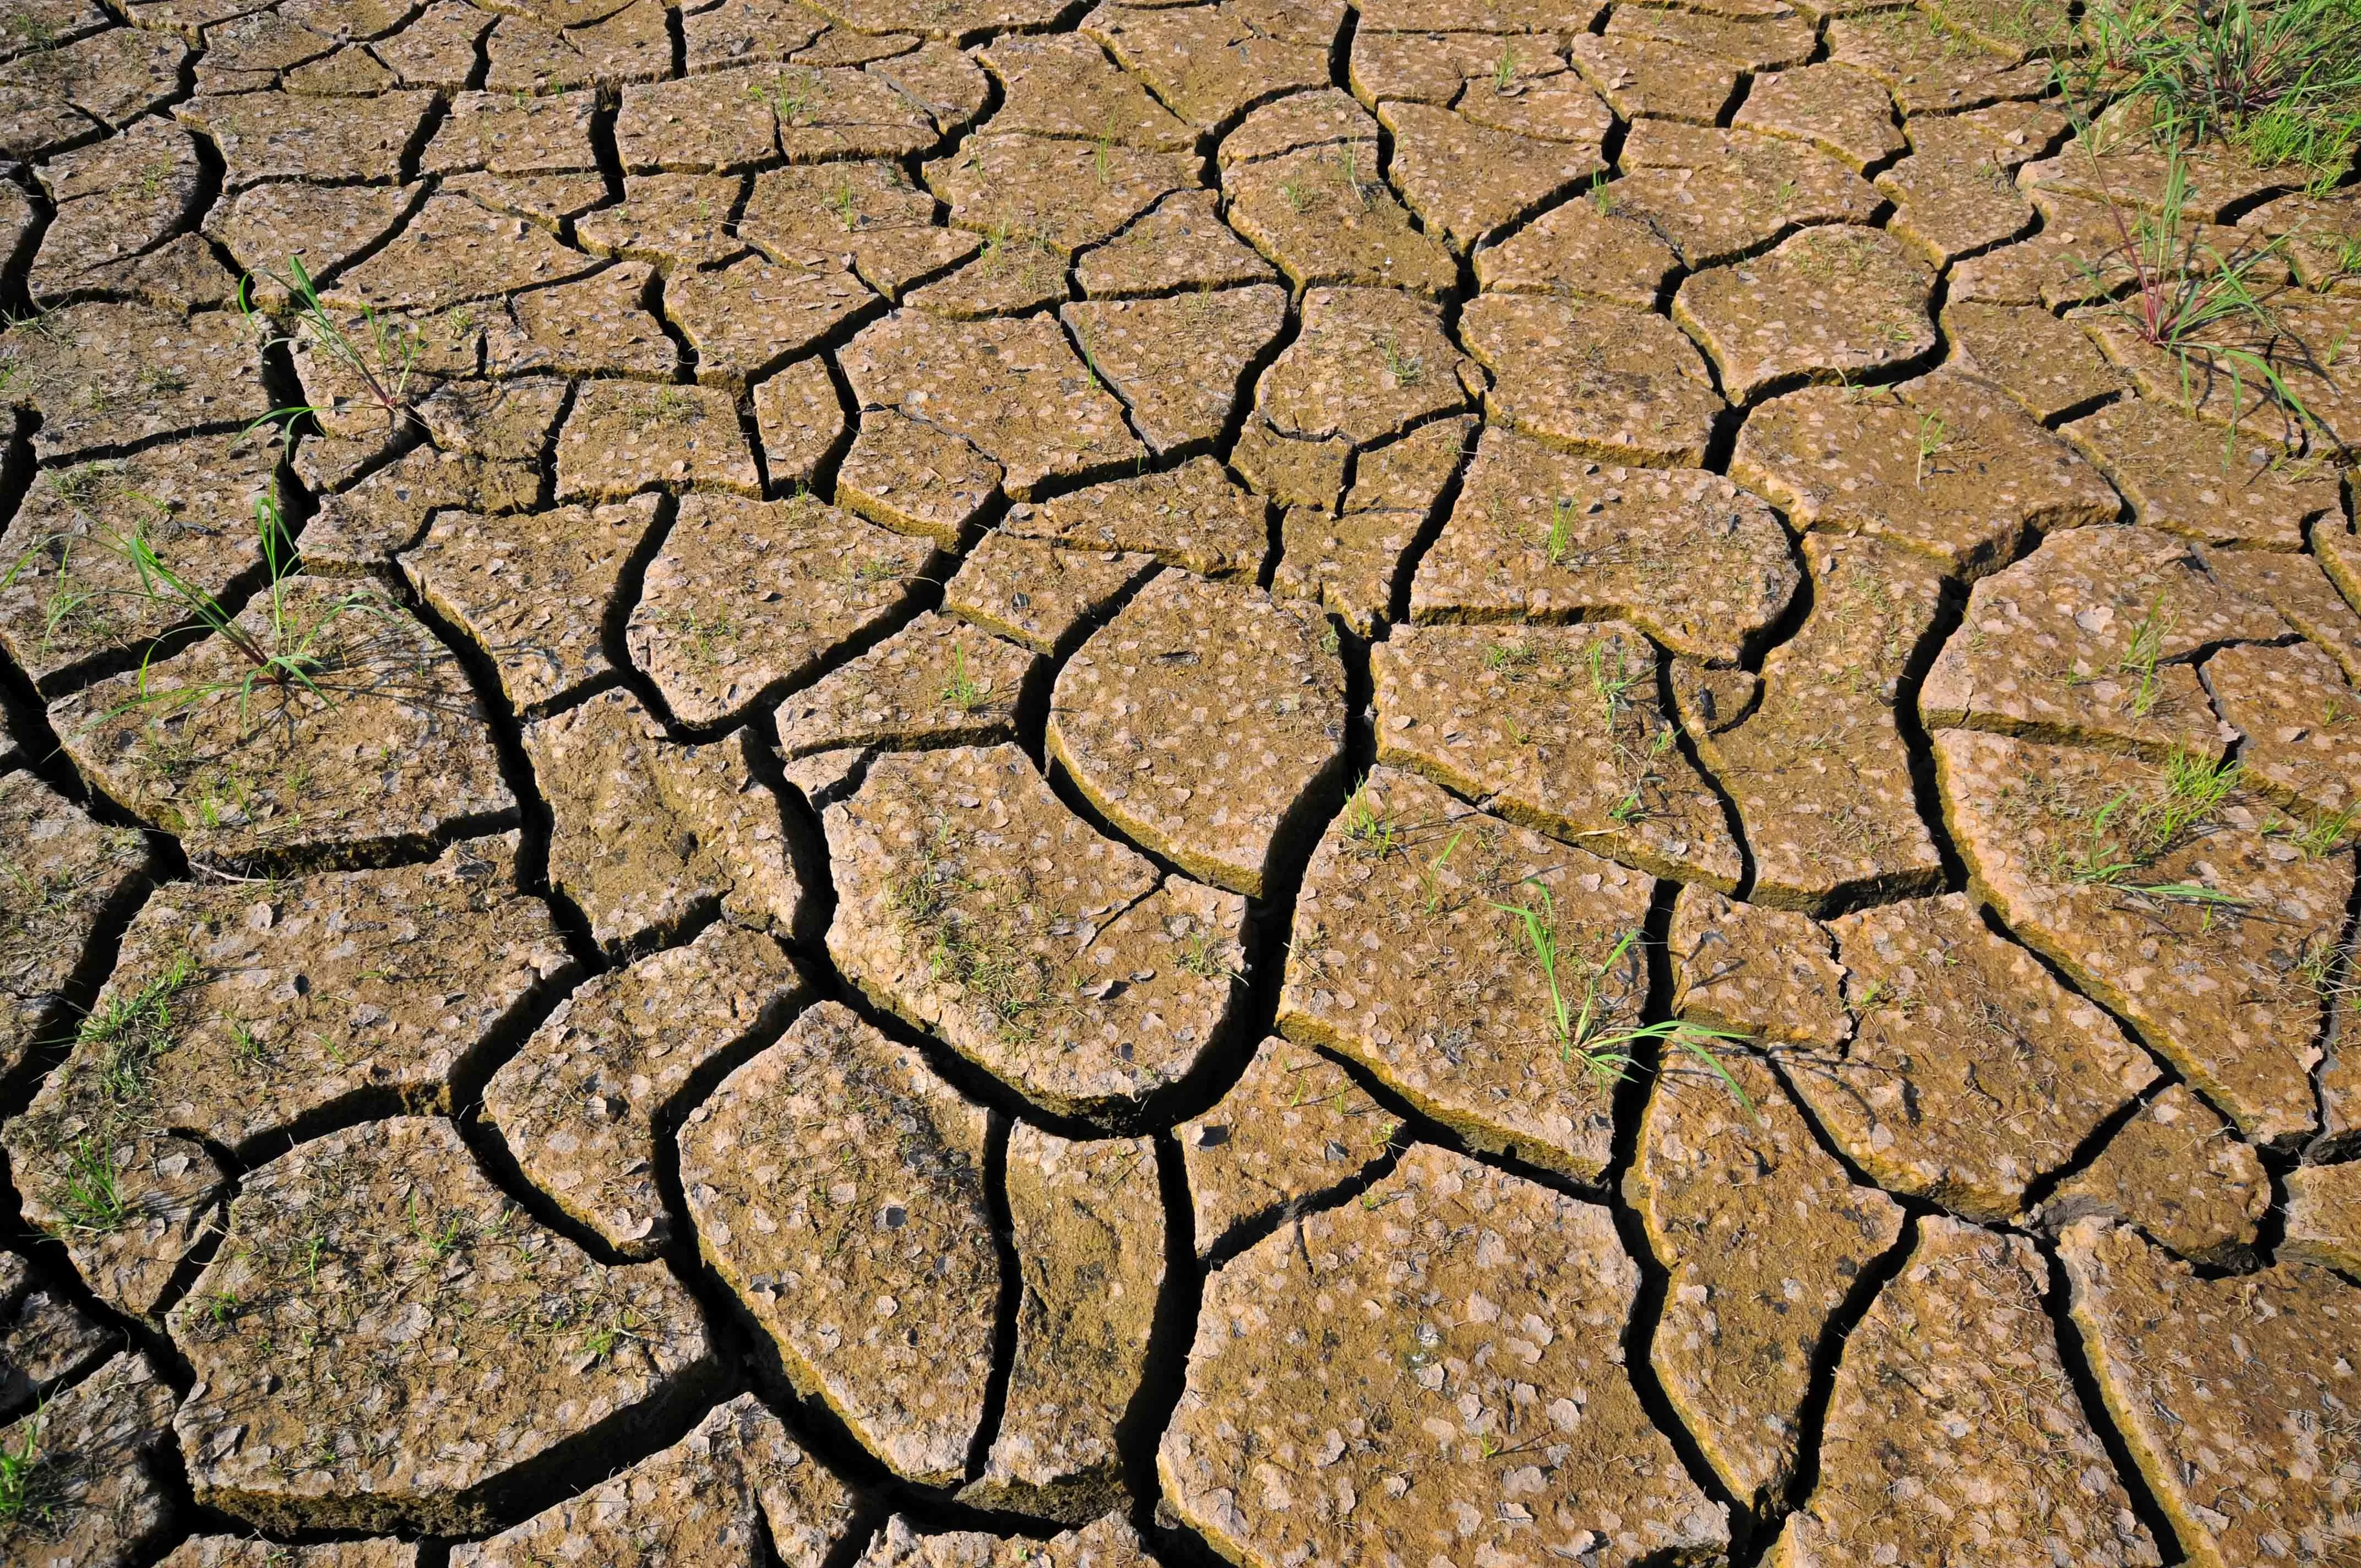 Cracks in clay ground. When clay dries, it contracts, generating cracks. When it rains, the water is reincorporated, the clay swells again and the cracks seal. Photo: © <a rel="noreferrer noopener" href="https://www.flickr.com/photos/38476503@N08/4459581071" data-type="URL" data-id="https://www.flickr.com/photos/38476503@N08/4459581071" target="_blank">2010CIAT / NeilPalmer</a> <a rel="noreferrer noopener" href="https://creativecommons.org/licenses/by-sa/2.0/?ref=ccsearch&atype=rich" target="_blank">CC BY-SA 2.0</a>